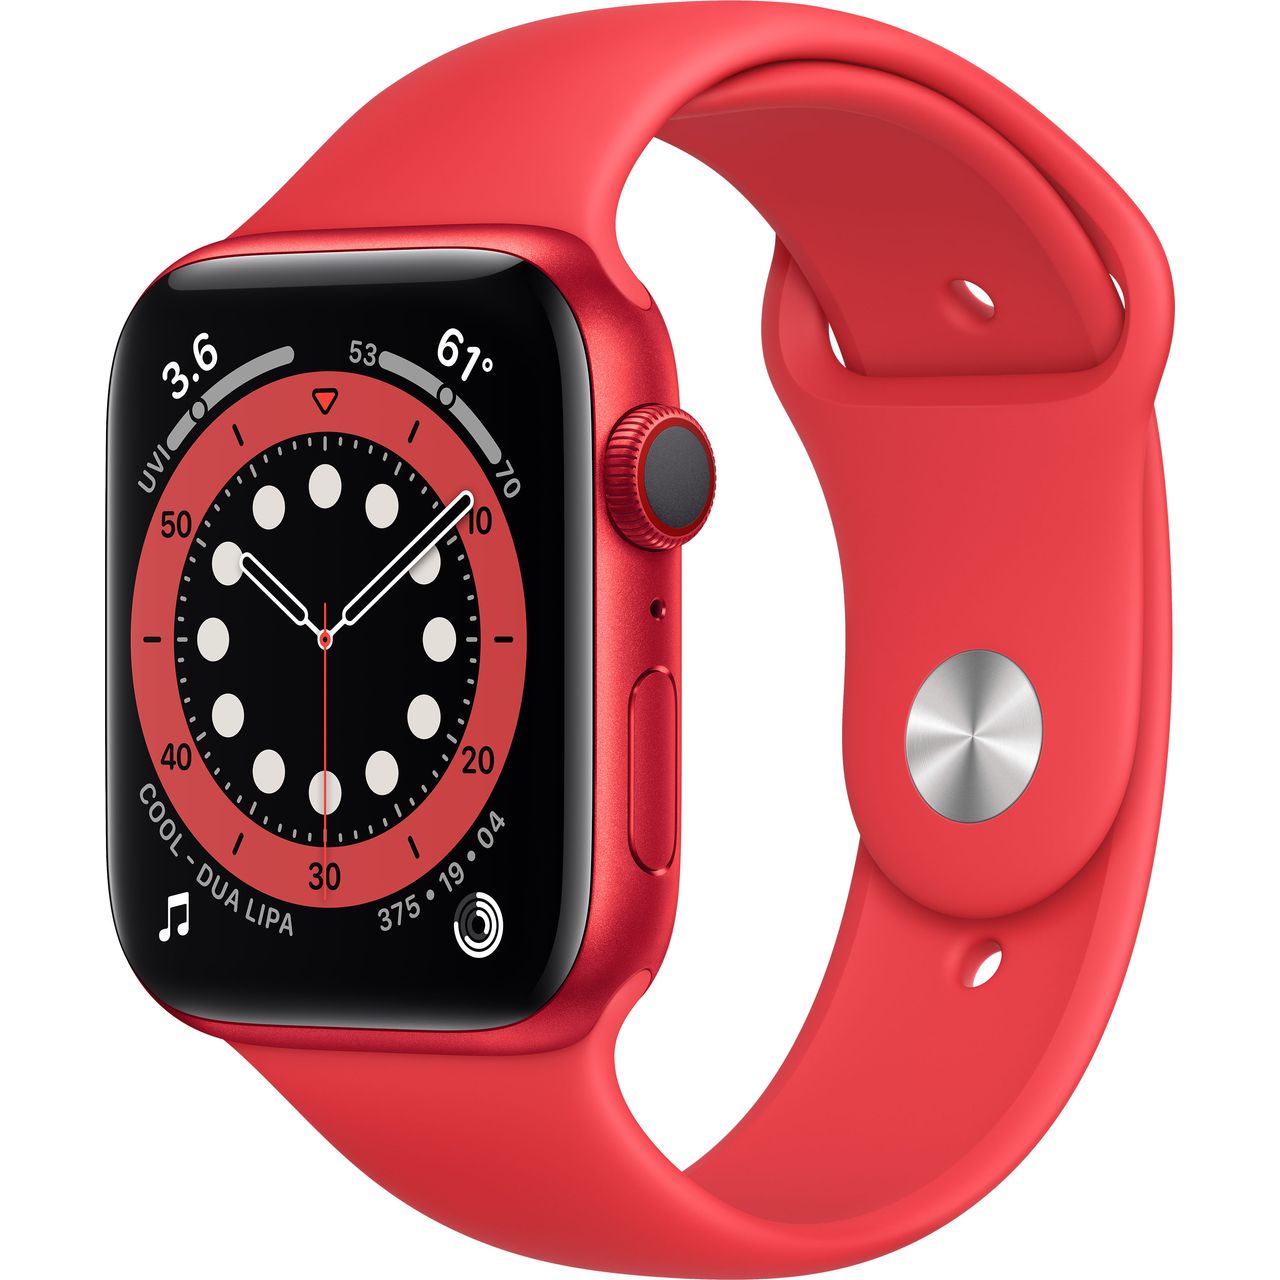 Apple Watch Series 6, 44mm, GPS + Cellular [2020] Review